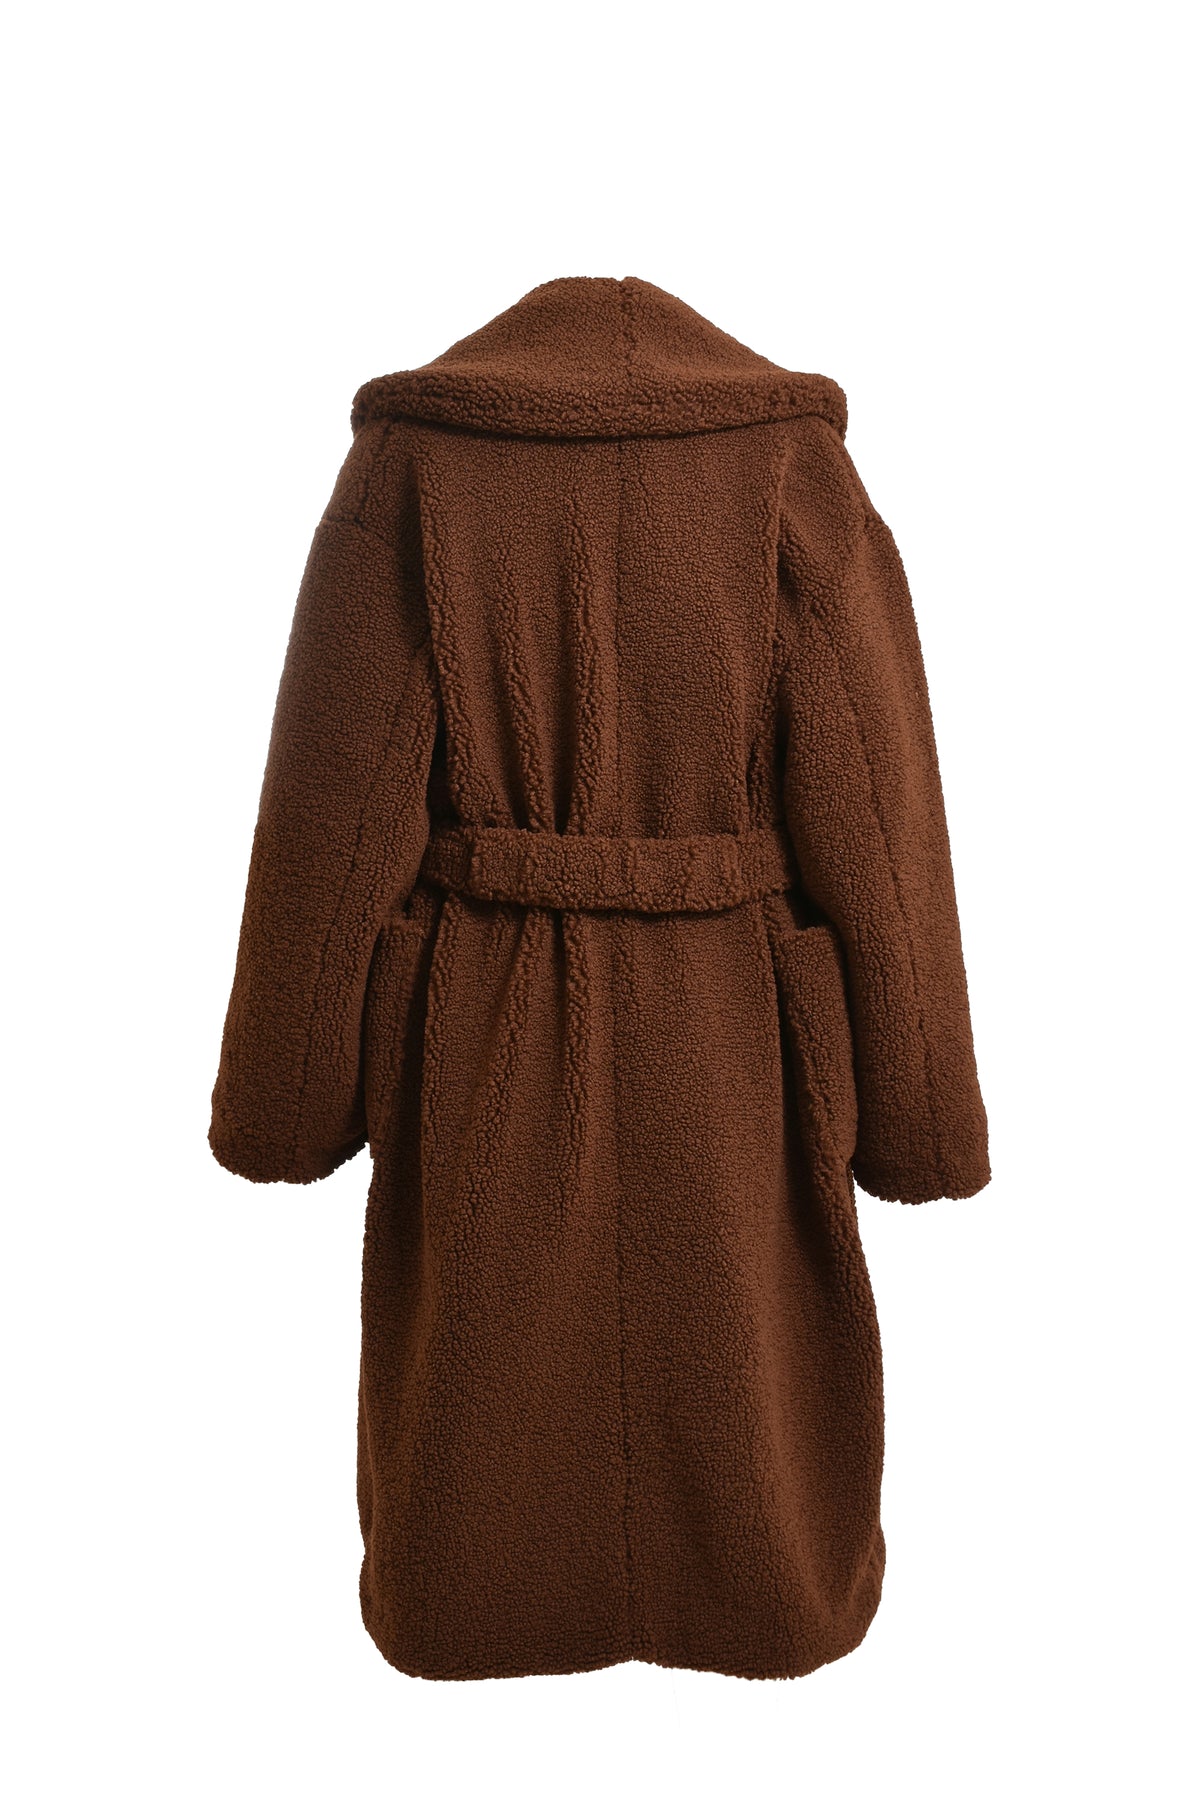 Casablanca RECYCLED POLYESTER SHEARLING ROBE / BRW